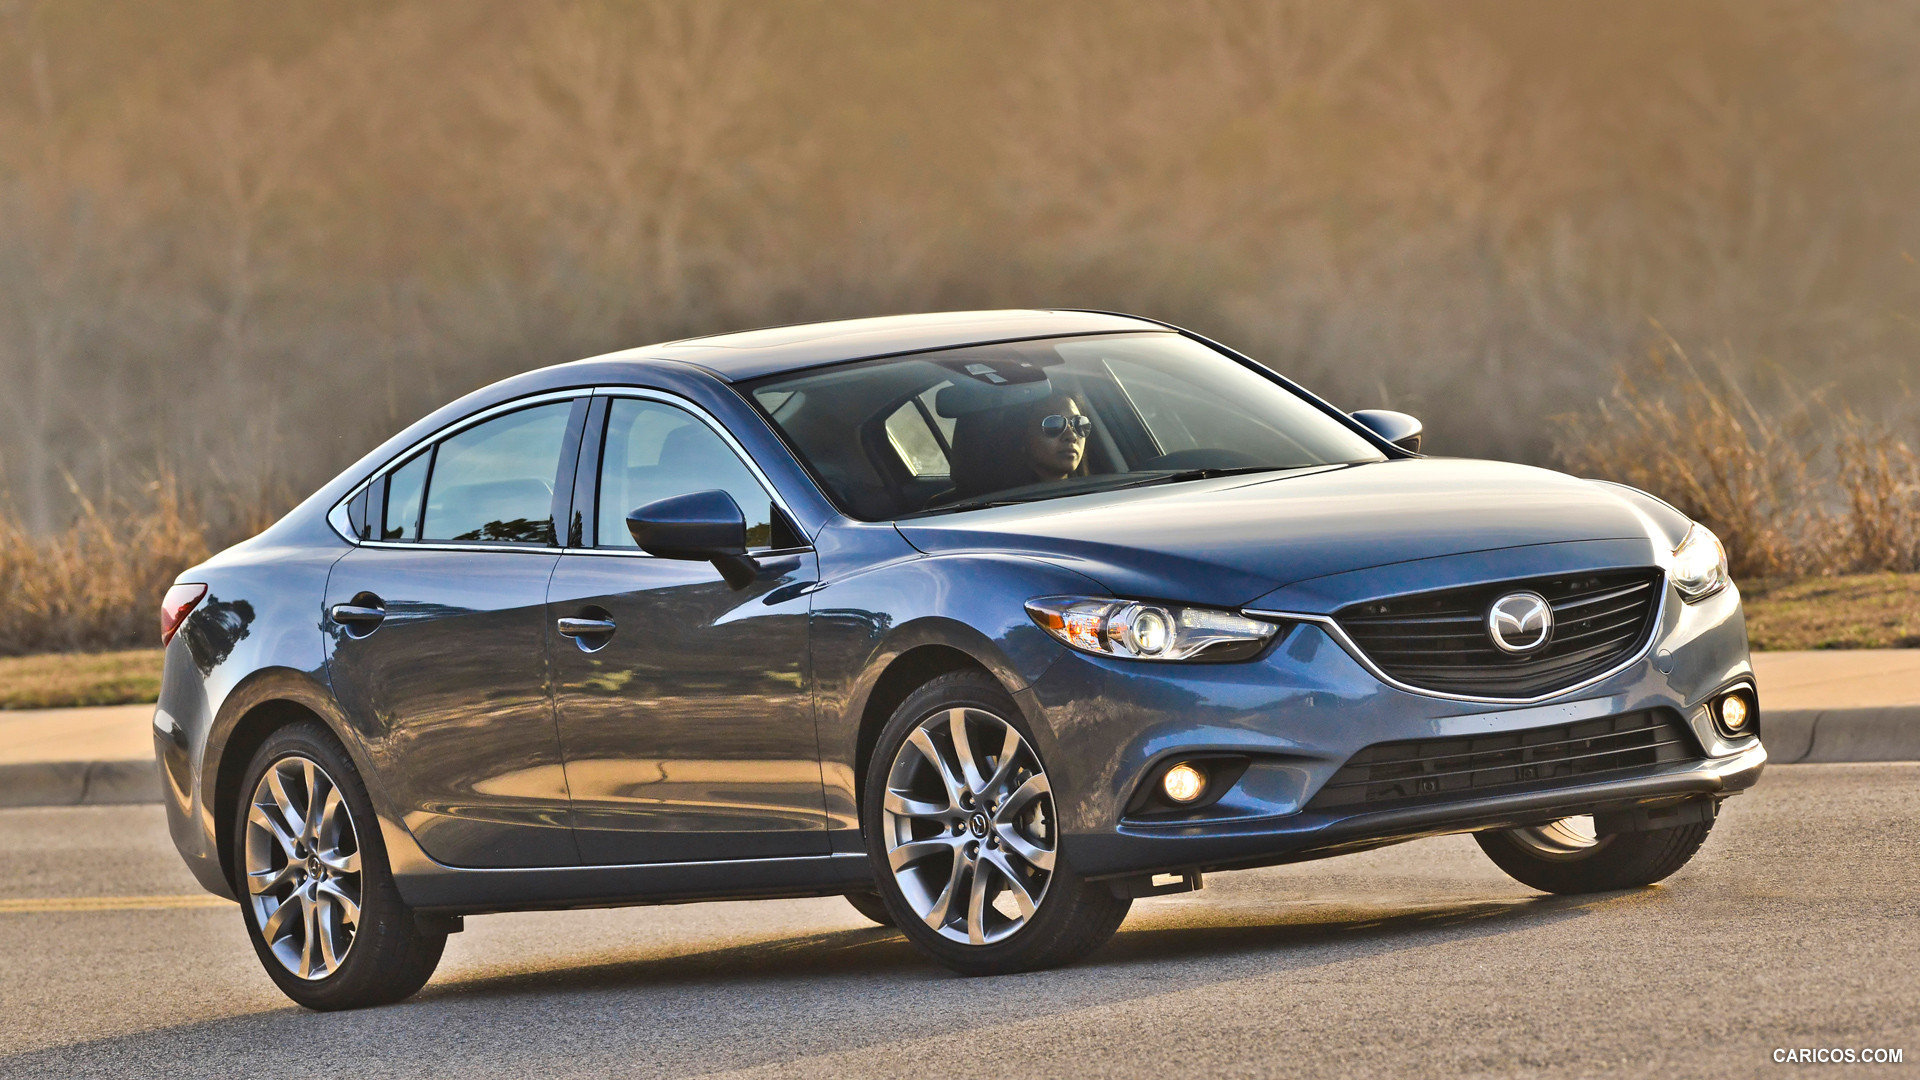 2014 Mazda6 GT - Front, #128 of 179